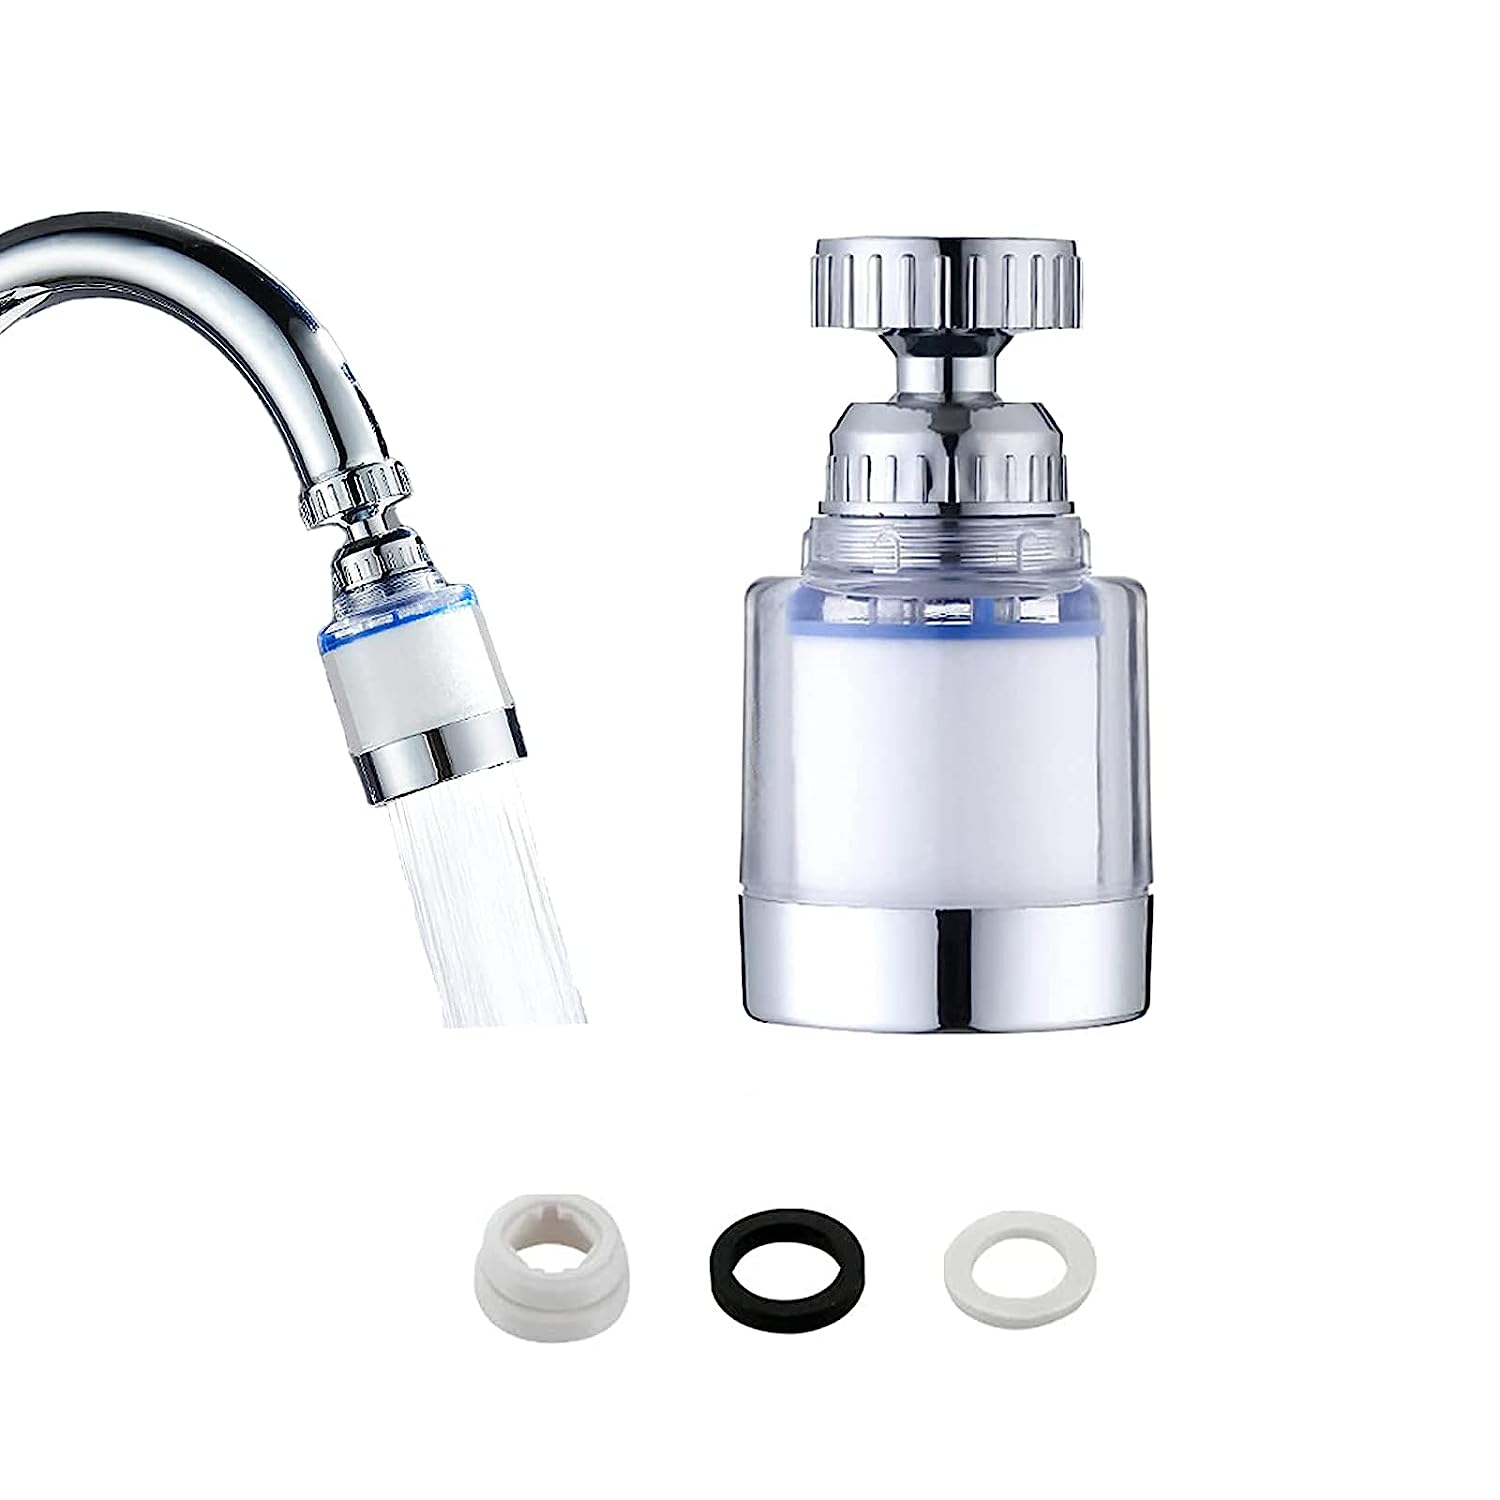 Blue 360-Degree Rotating Faucet Filter Water Purifier [...]